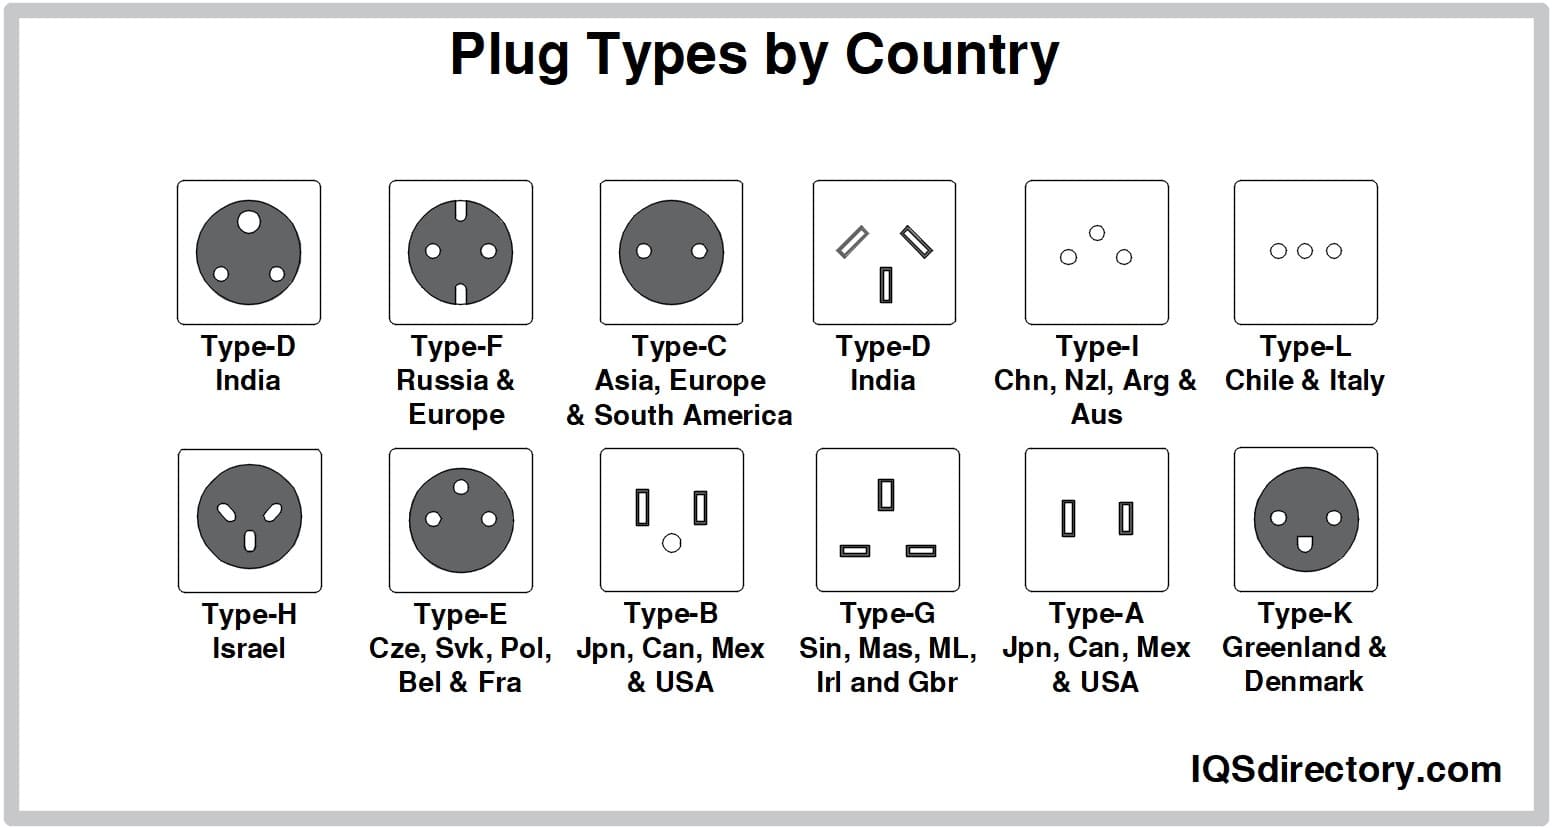 Plug Types by Country